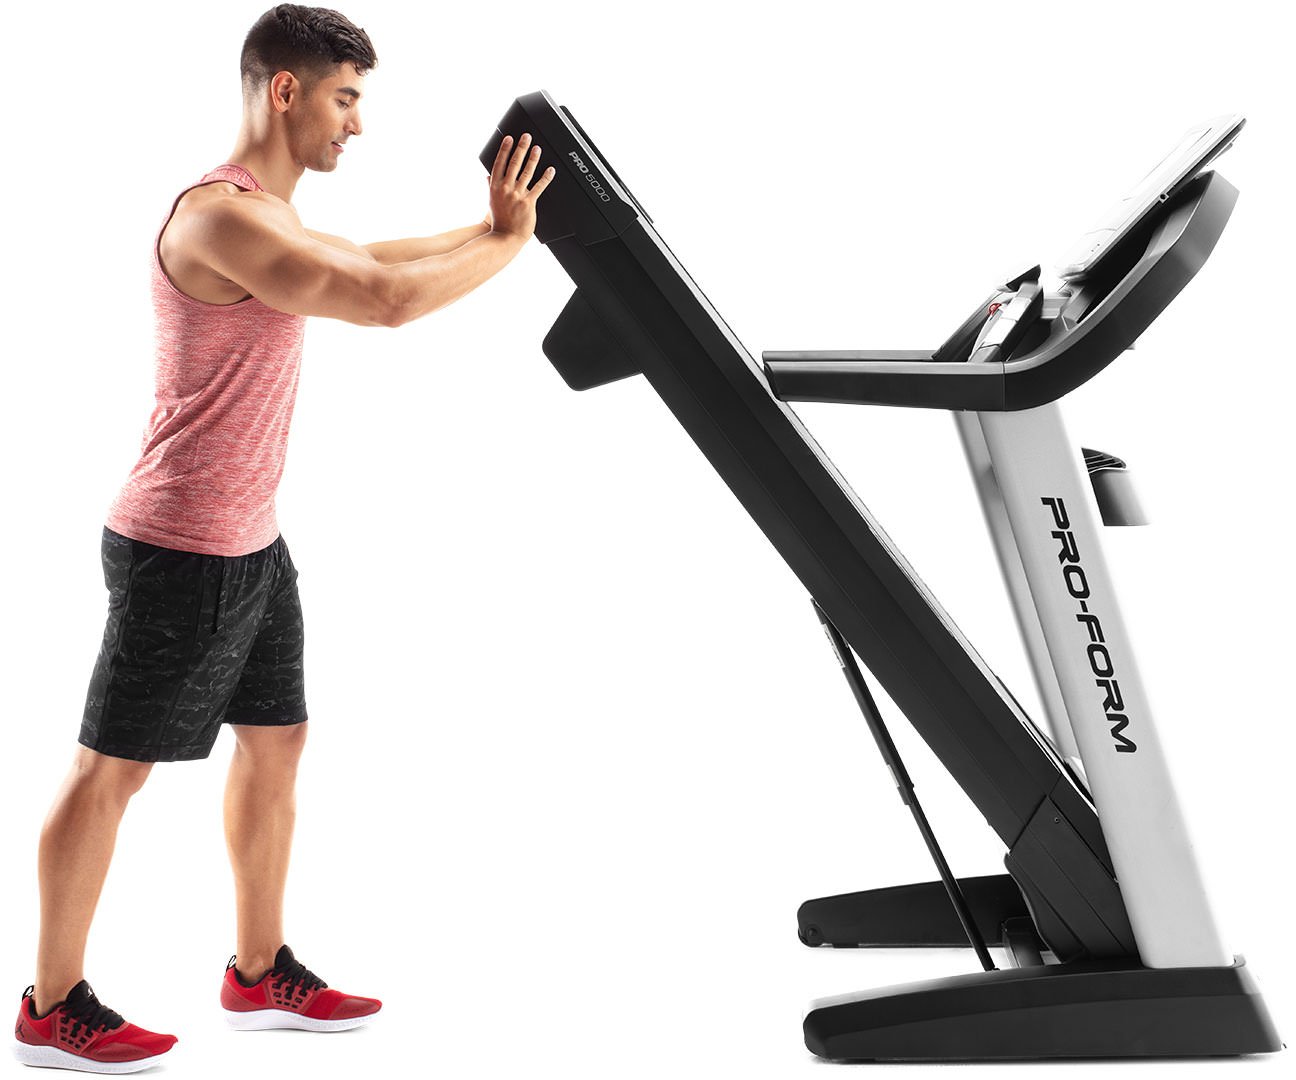 man lifting proform treadmill with easylift assist